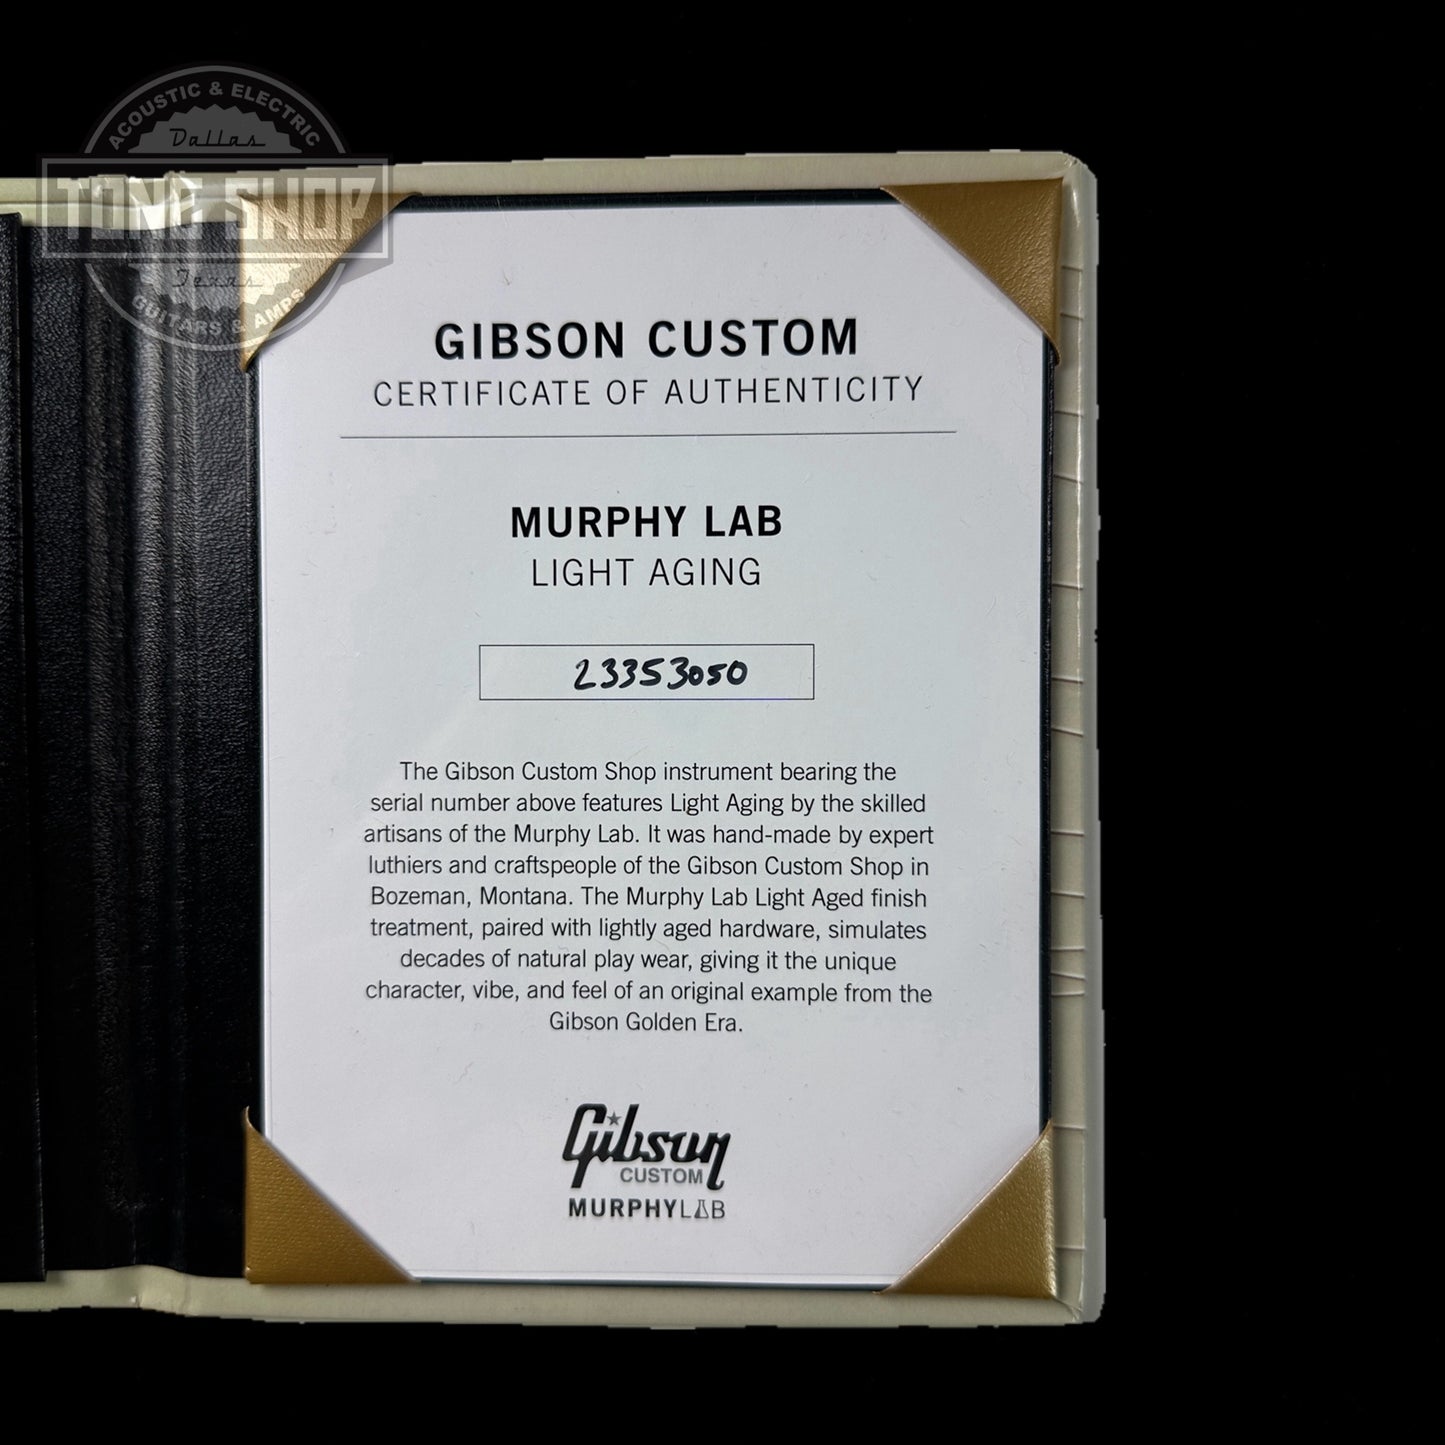 Certificate of authenticity for Gibson Acoustic 1960 Hummingbird Murphy Lab Light Aged Heritage Cherry Sunburst.